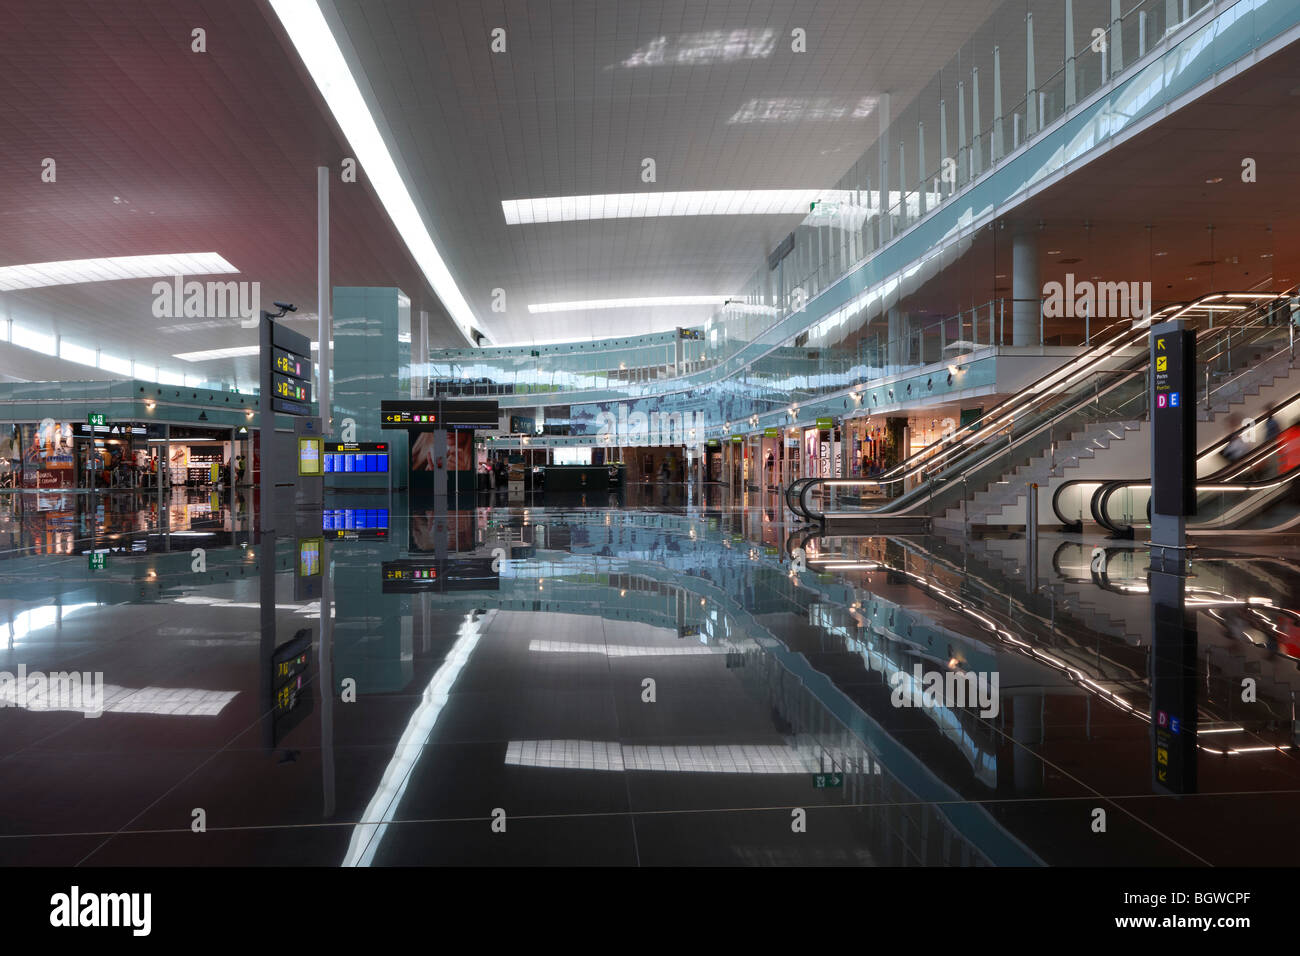 general view of naturally lit airside shopping areas in the terminal building Stock Photo